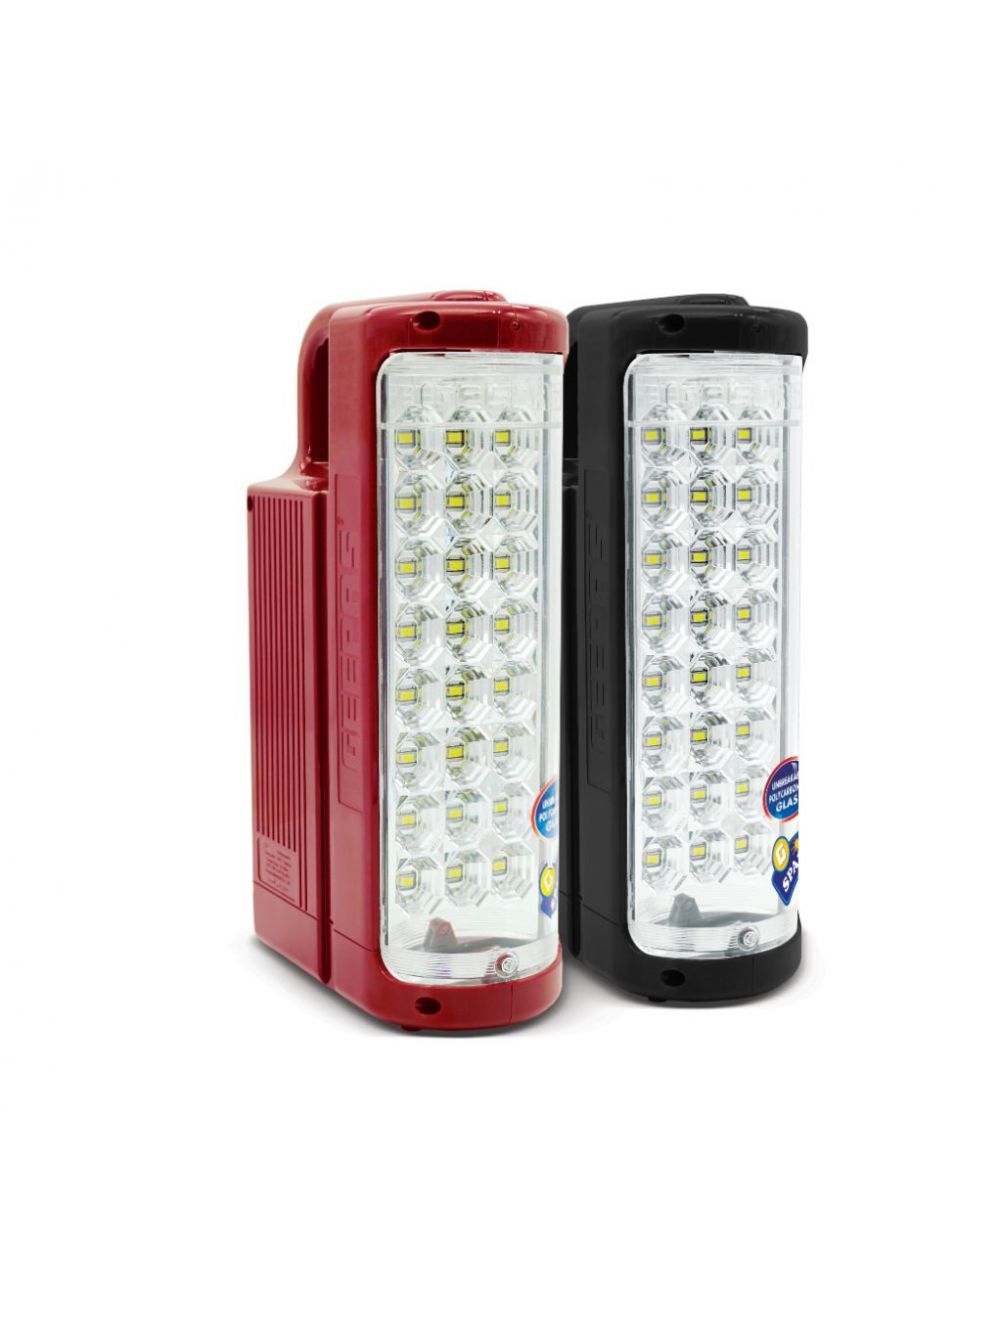 Geepas GE5566 Rechargeable LED Lantern, Red & Black - Pack of 2